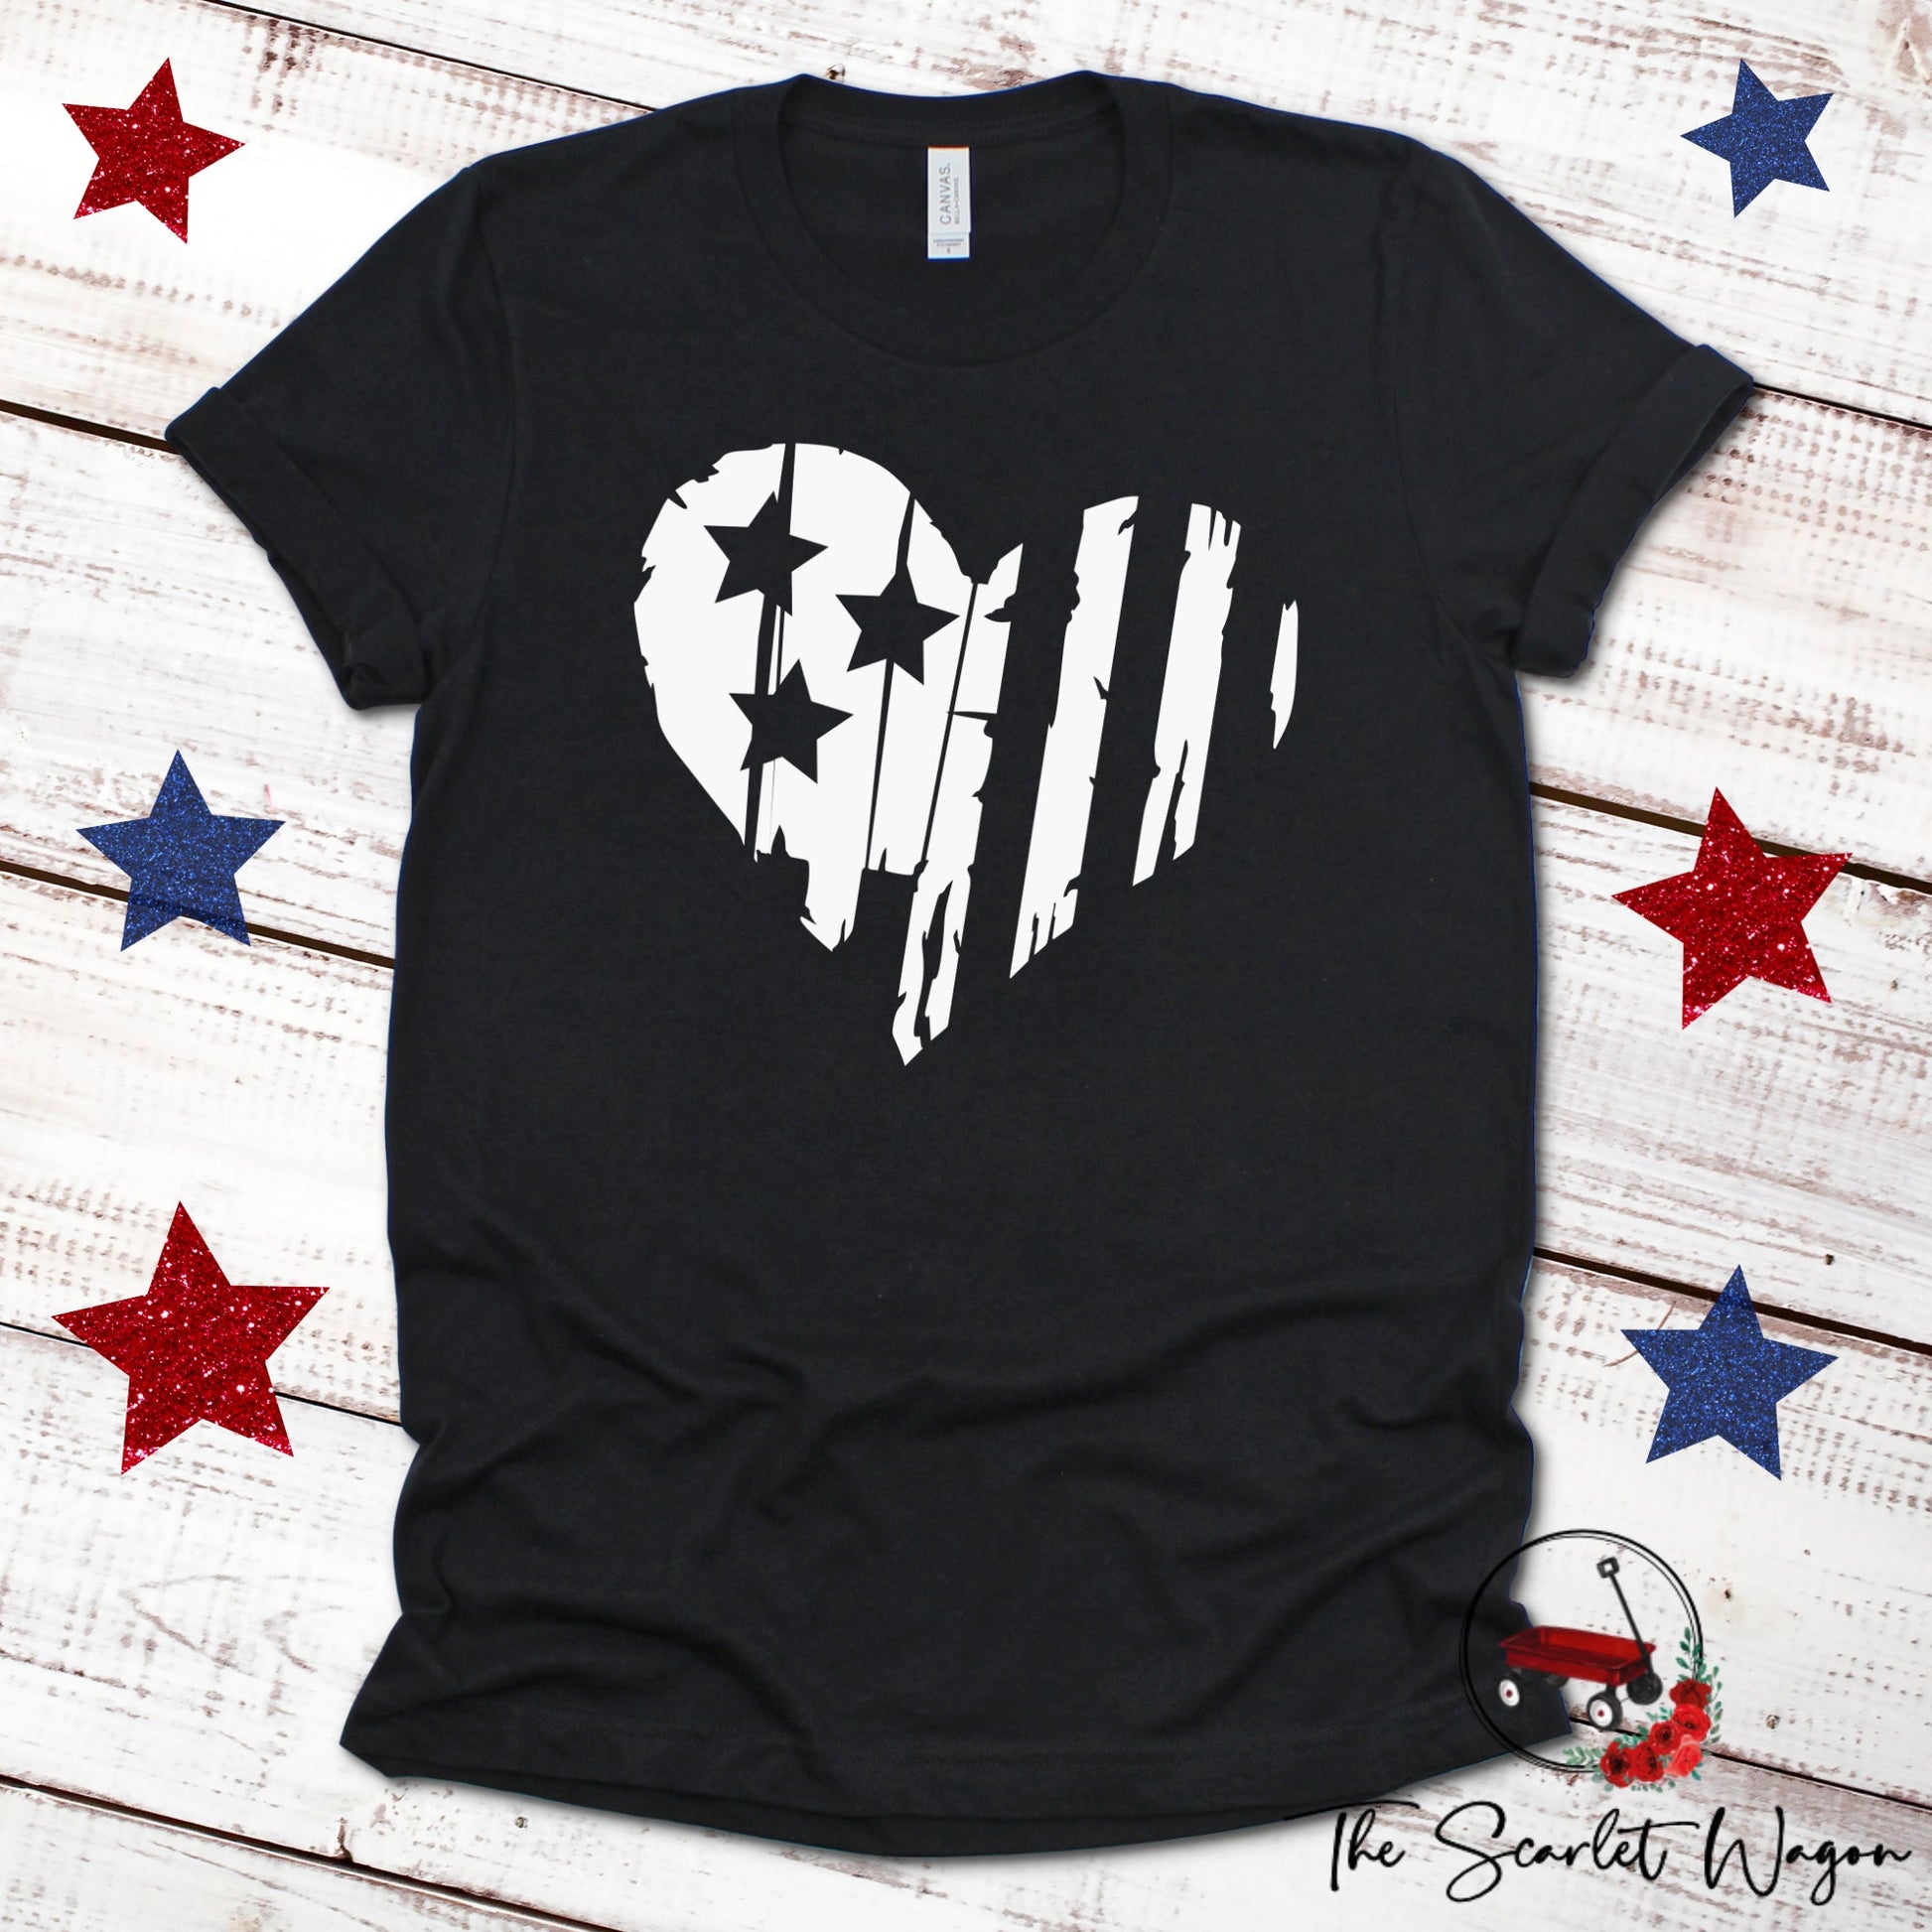 Distressed Heart-Shaped Flag Unisex Tee Patriotic Shirt The Scarlet Wagon Boutique Black XS 